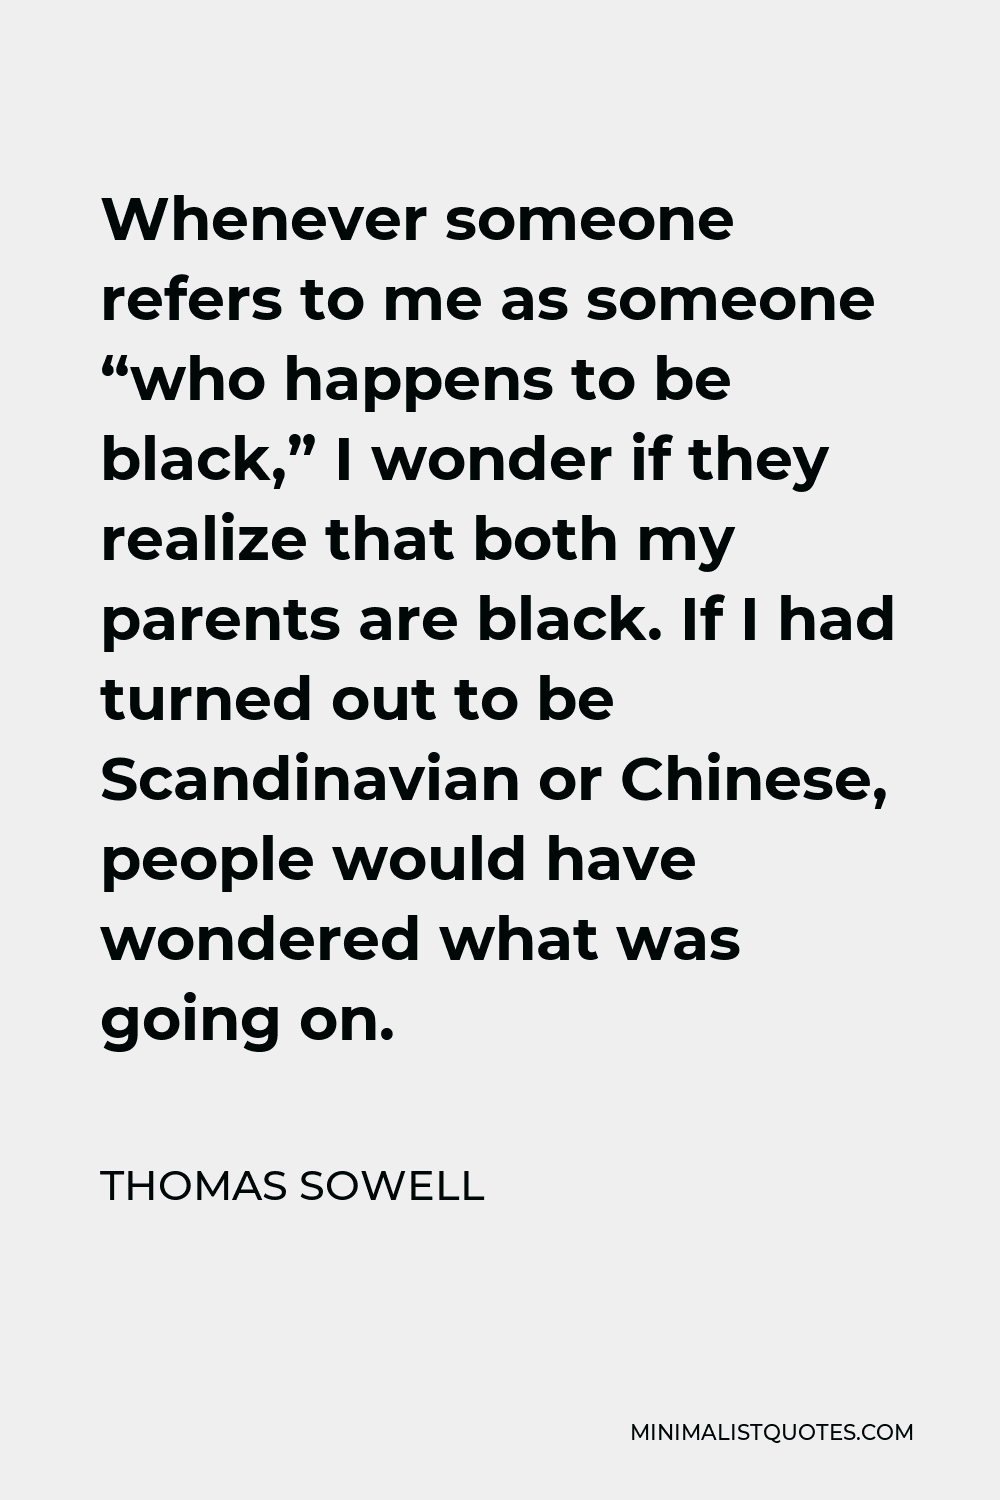 Thomas Sowell Quote - Whenever someone refers to me as someone “who happens to be black,” I wonder if they realize that both my parents are black. If I had turned out to be Scandinavian or Chinese, people would have wondered what was going on.